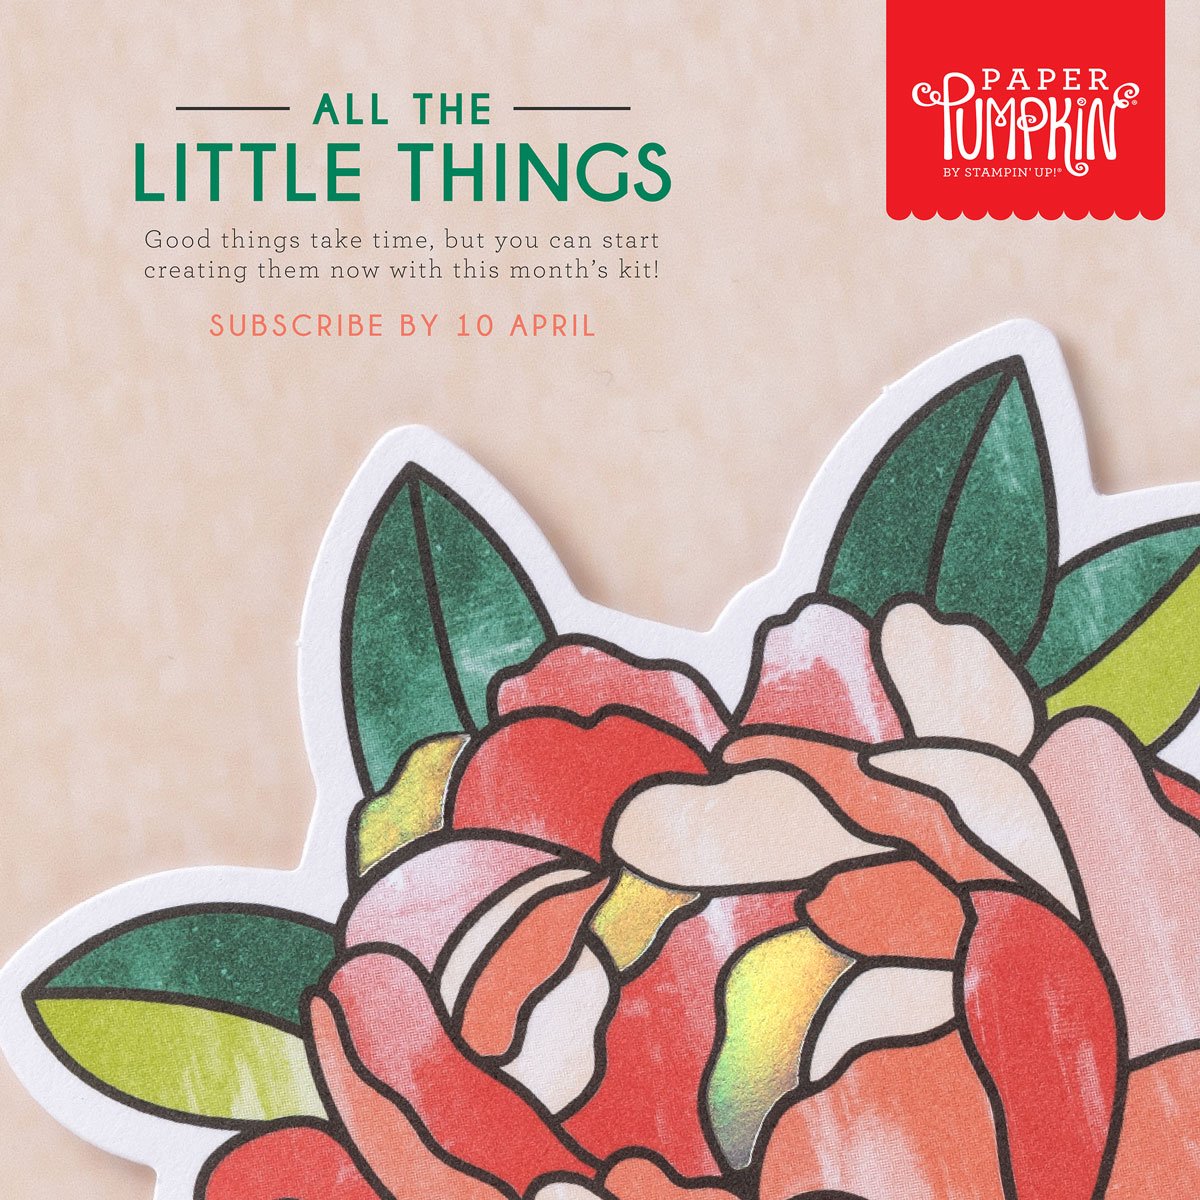 Good things take time, but you can start creating them now with the All the Little Things Paper Pumpkin kit! This kit includes nine cards, three each of three designs, with elegant designs and bright colors. The iridescent foil is the shining detail to bring your crafts together. You can make a card for anyone and for any occasion!</p>
<p>And don’t wait, because anyone who subscribes to this month’s kit will get a FREE box organizer! This organizer fits perfectly inside your Paper Pumpkin box and is great for keeping your supplies from past kits organized, so you know right where everything is! 